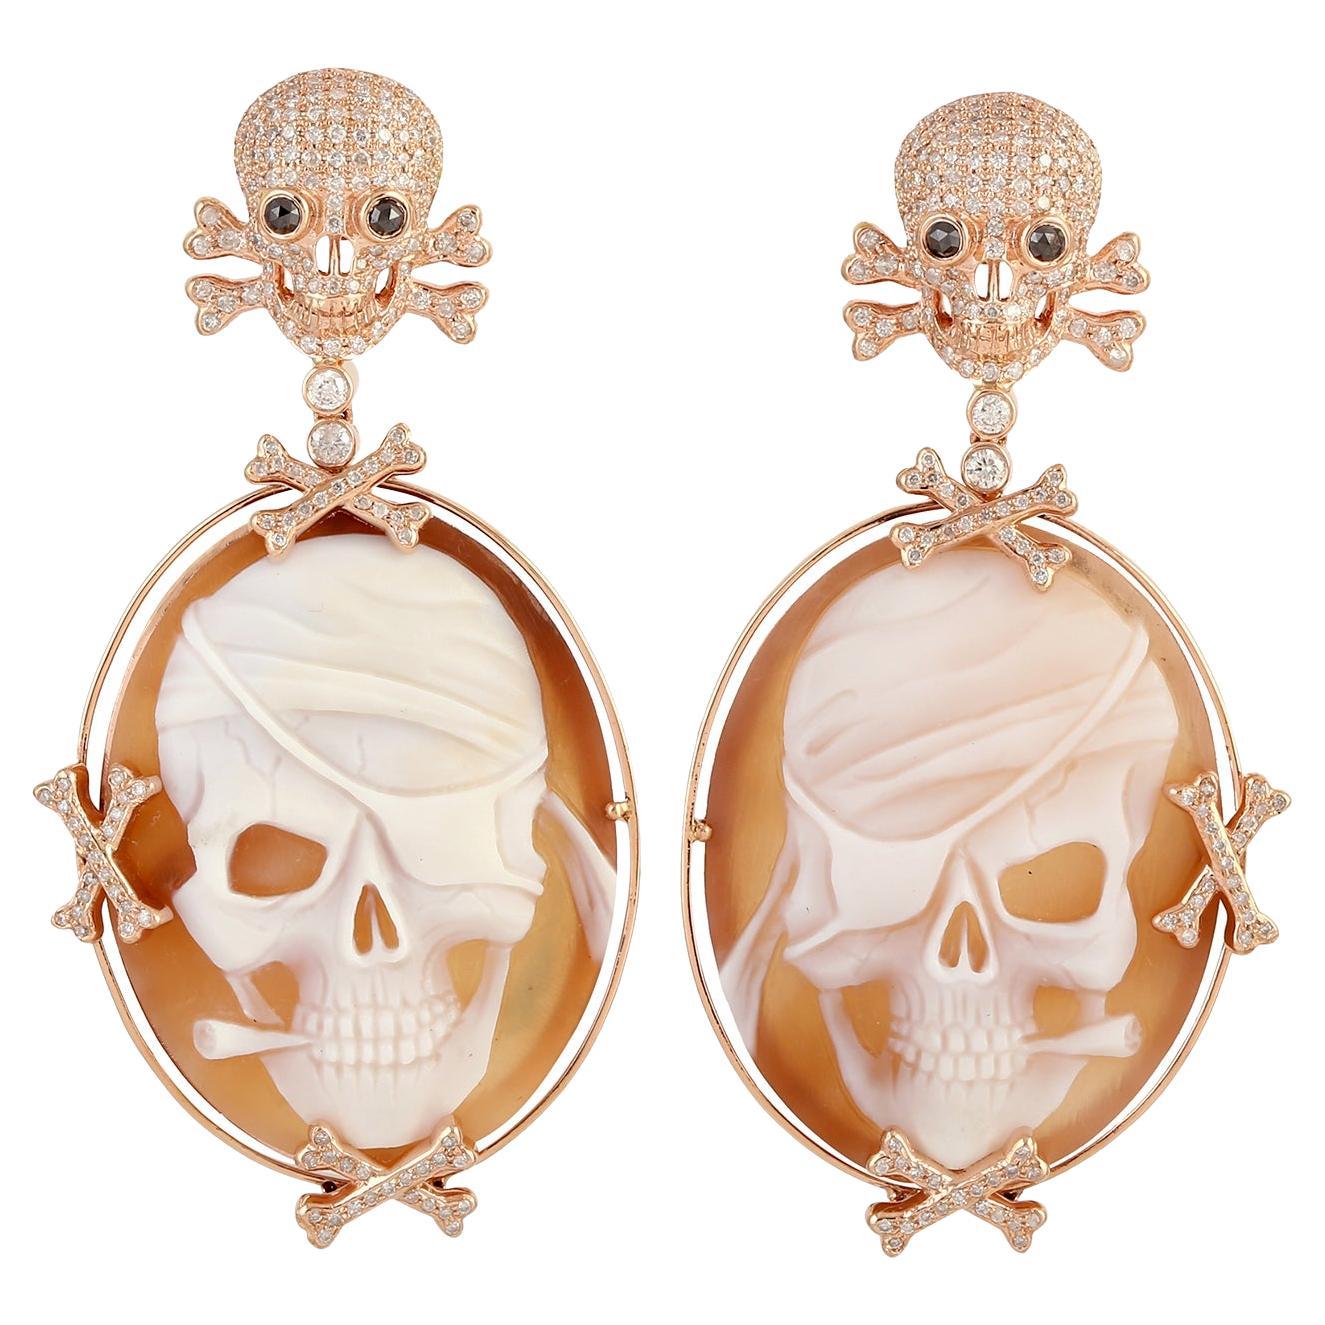 Shell Cameo Pirate Skull Earrings With Pave Diamonds Skull Made In 18k Rose Gold For Sale